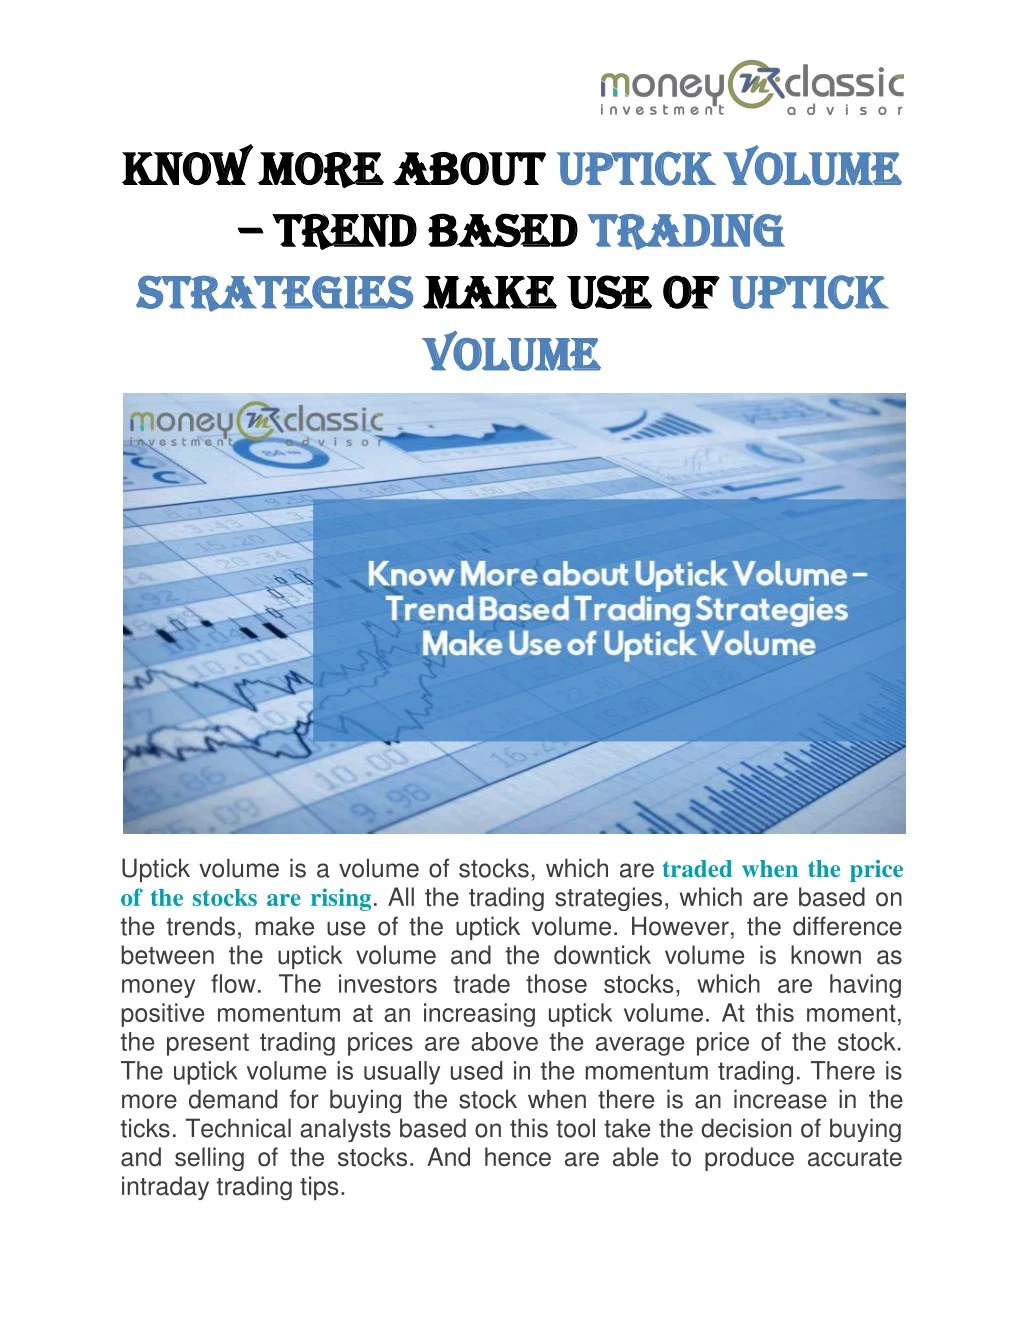 know more about know more about uptick volume